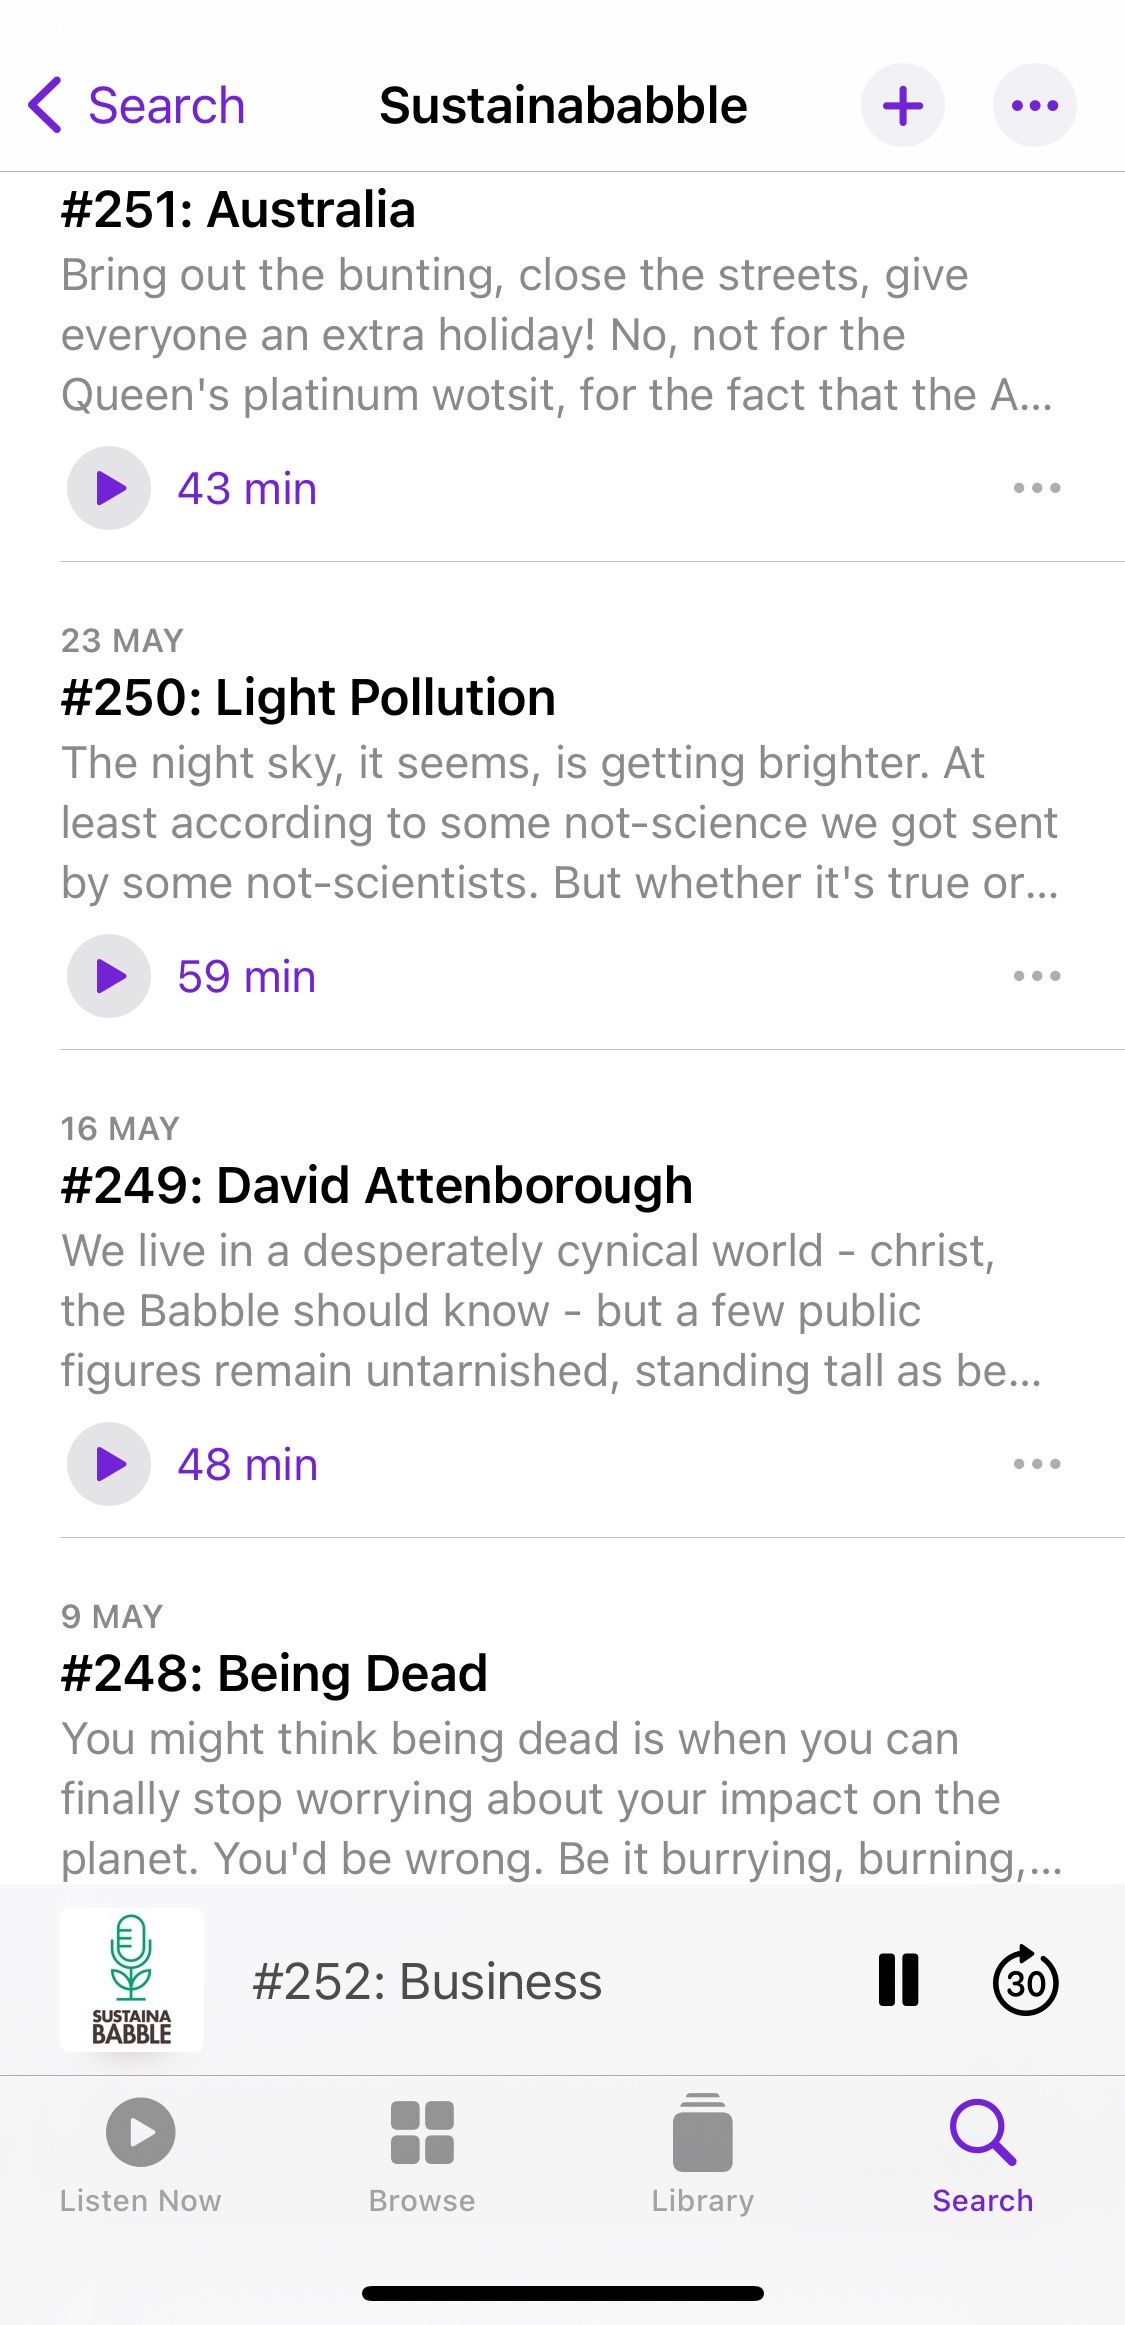 Screenshot showing Sustainababble podcast sample episodes